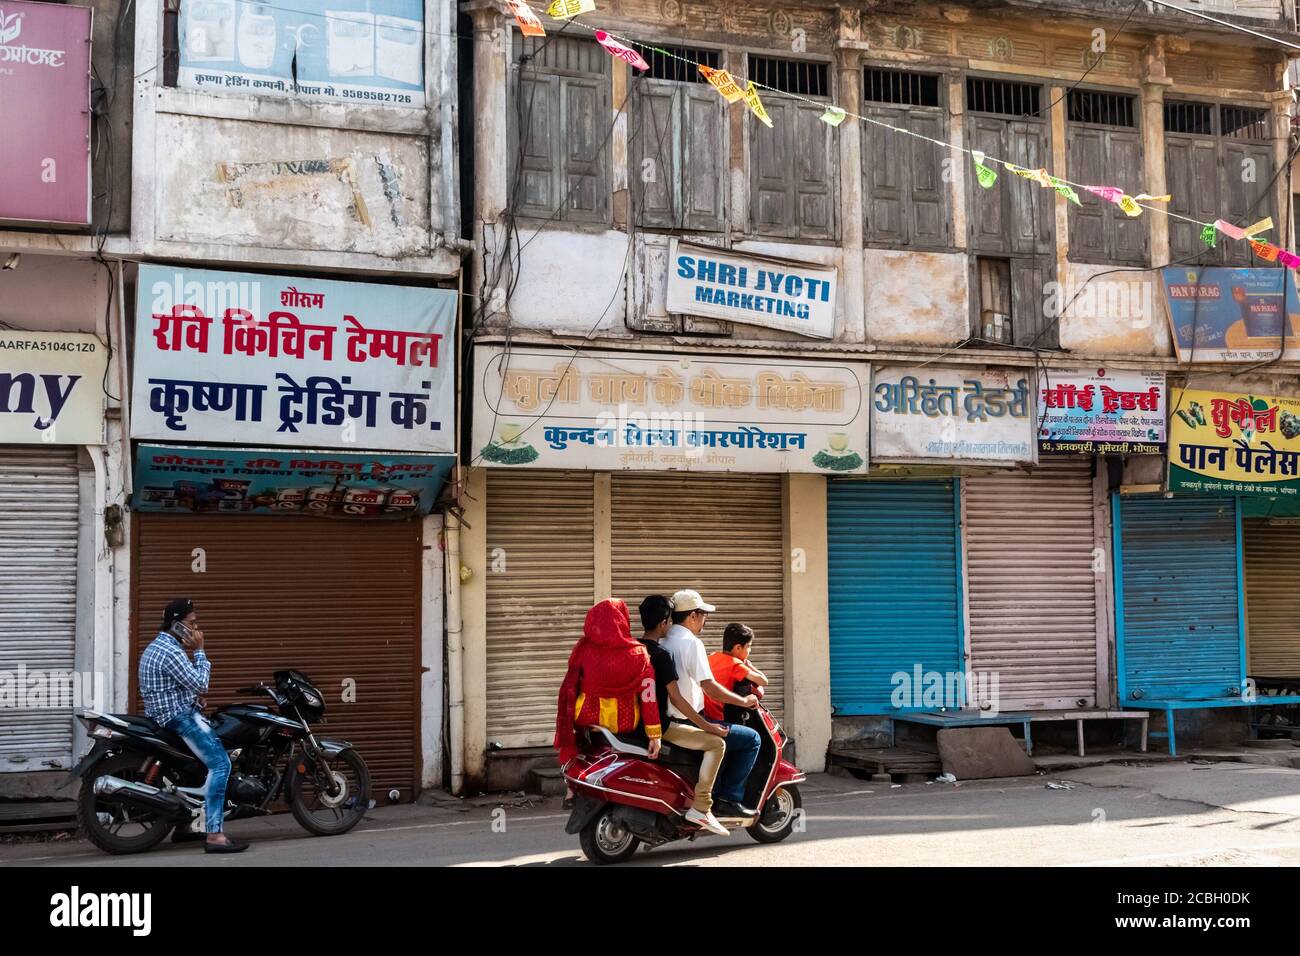 Bhopal, Madhya Pradesh,India - March 2019: An Indian family of four people riding on a scooter on the market streets of the old city of Bhopal. Stock Photo